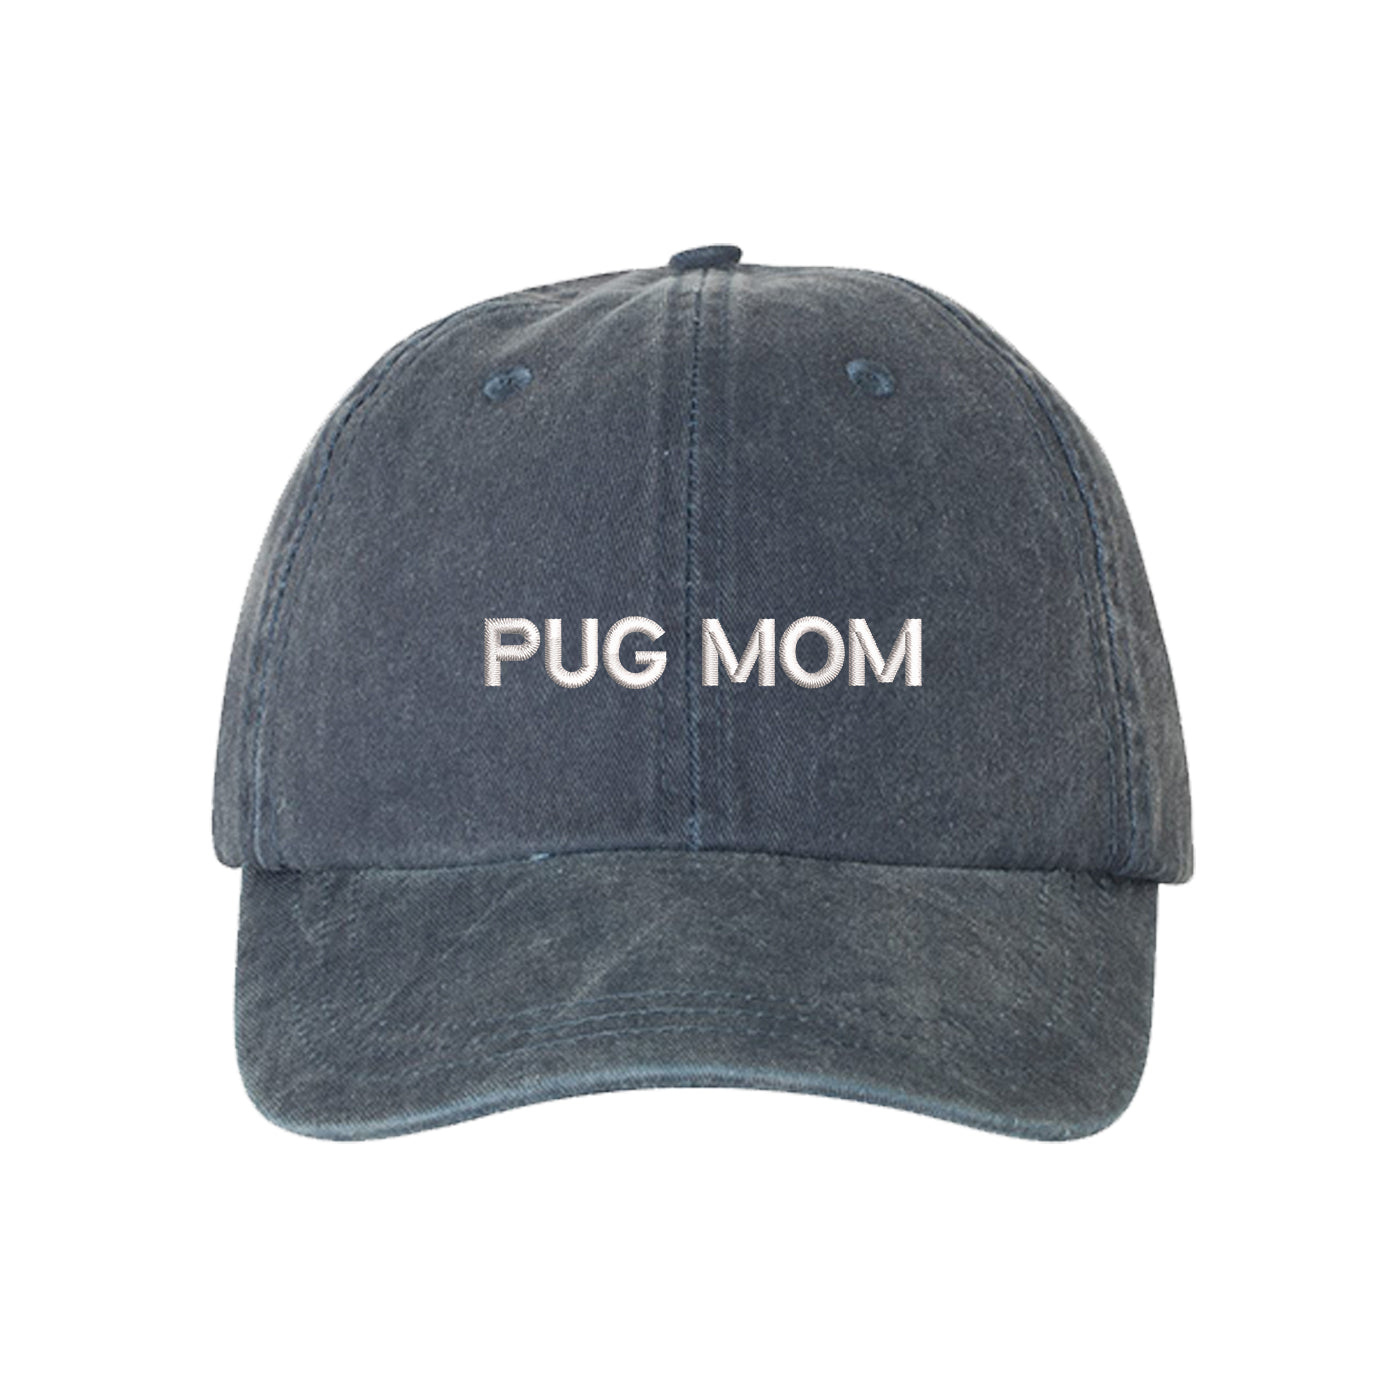 Pug Mom Washed Baseball Hat, Pug Mom Dad Hat, Dog Parent Hats, Embroidered Dad hat, Animal Lover Gifts, Pug Mother, Mothers Day Gift, Pug Mama, DSY Lifestyle Dad Hats, Navy Washed Baseball Hat